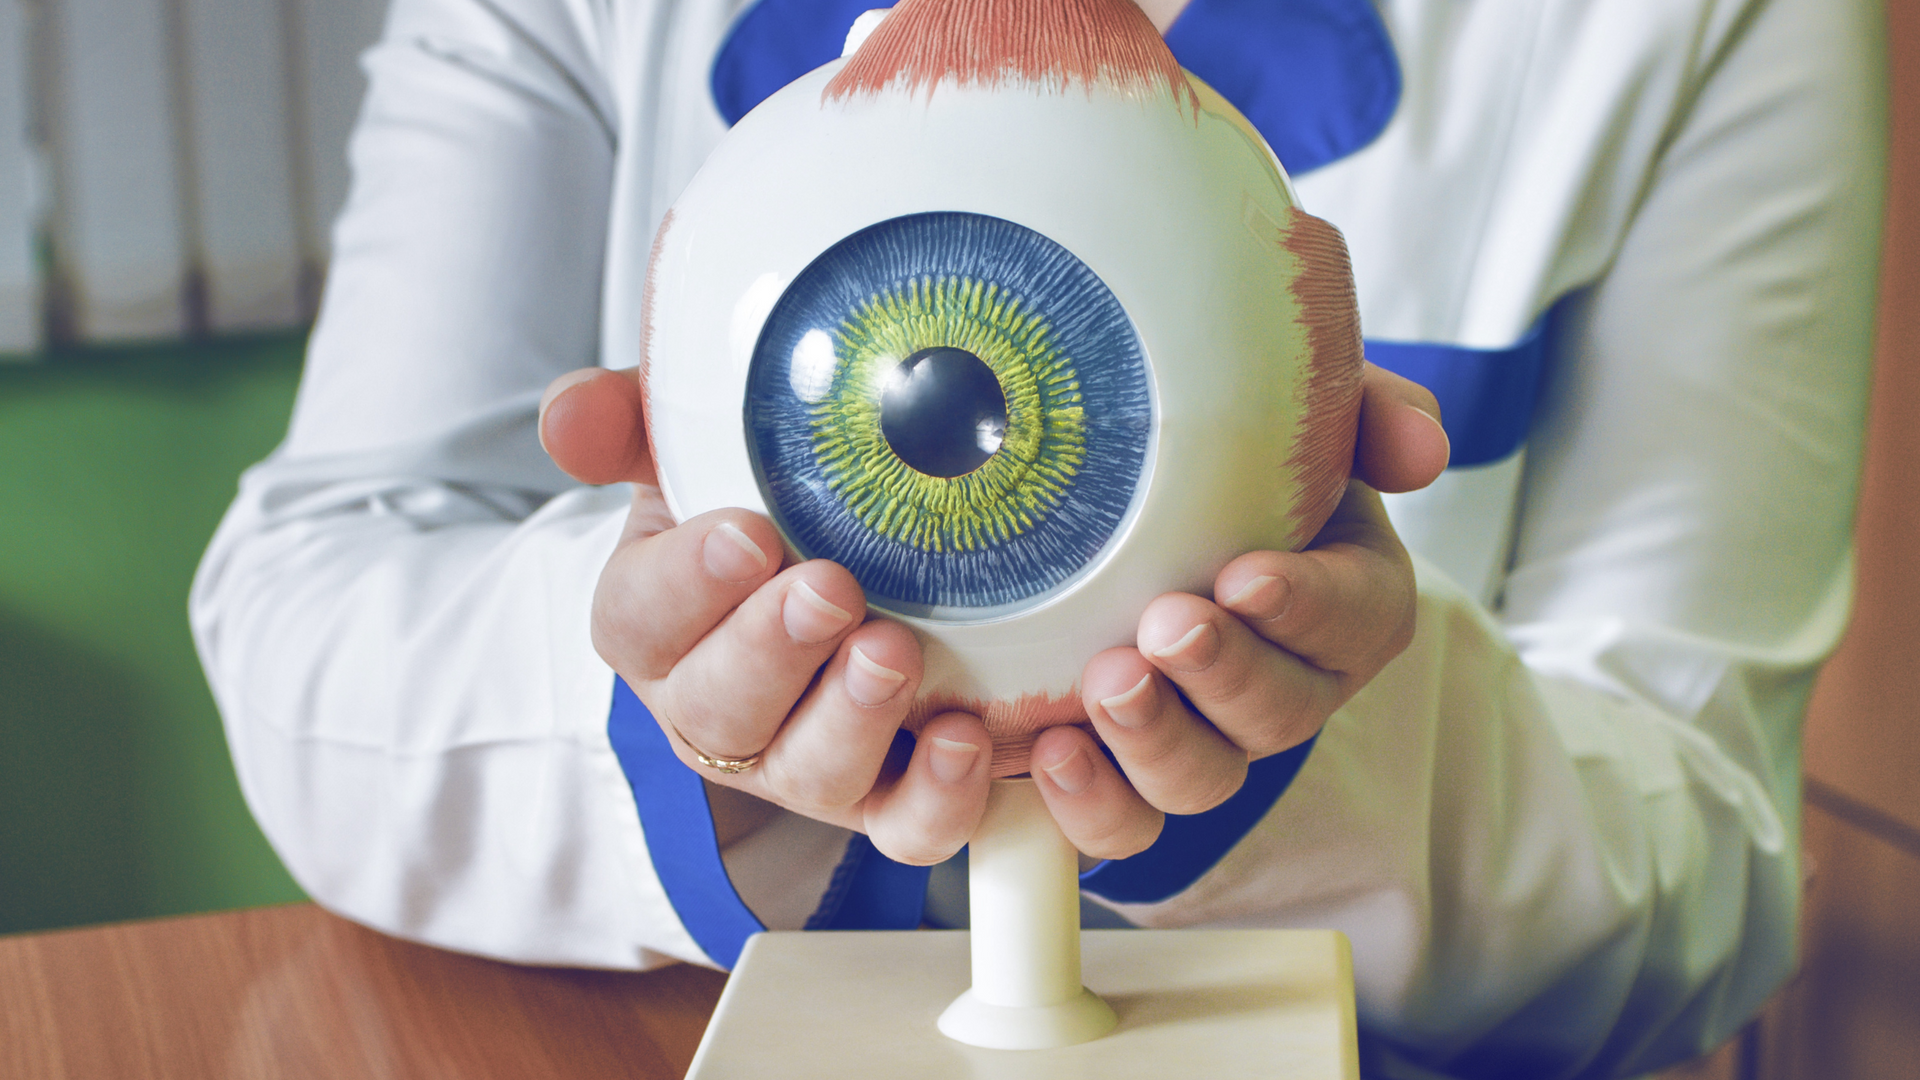 Glaucoma Surgery: Modern Tech for Healthy Eyes